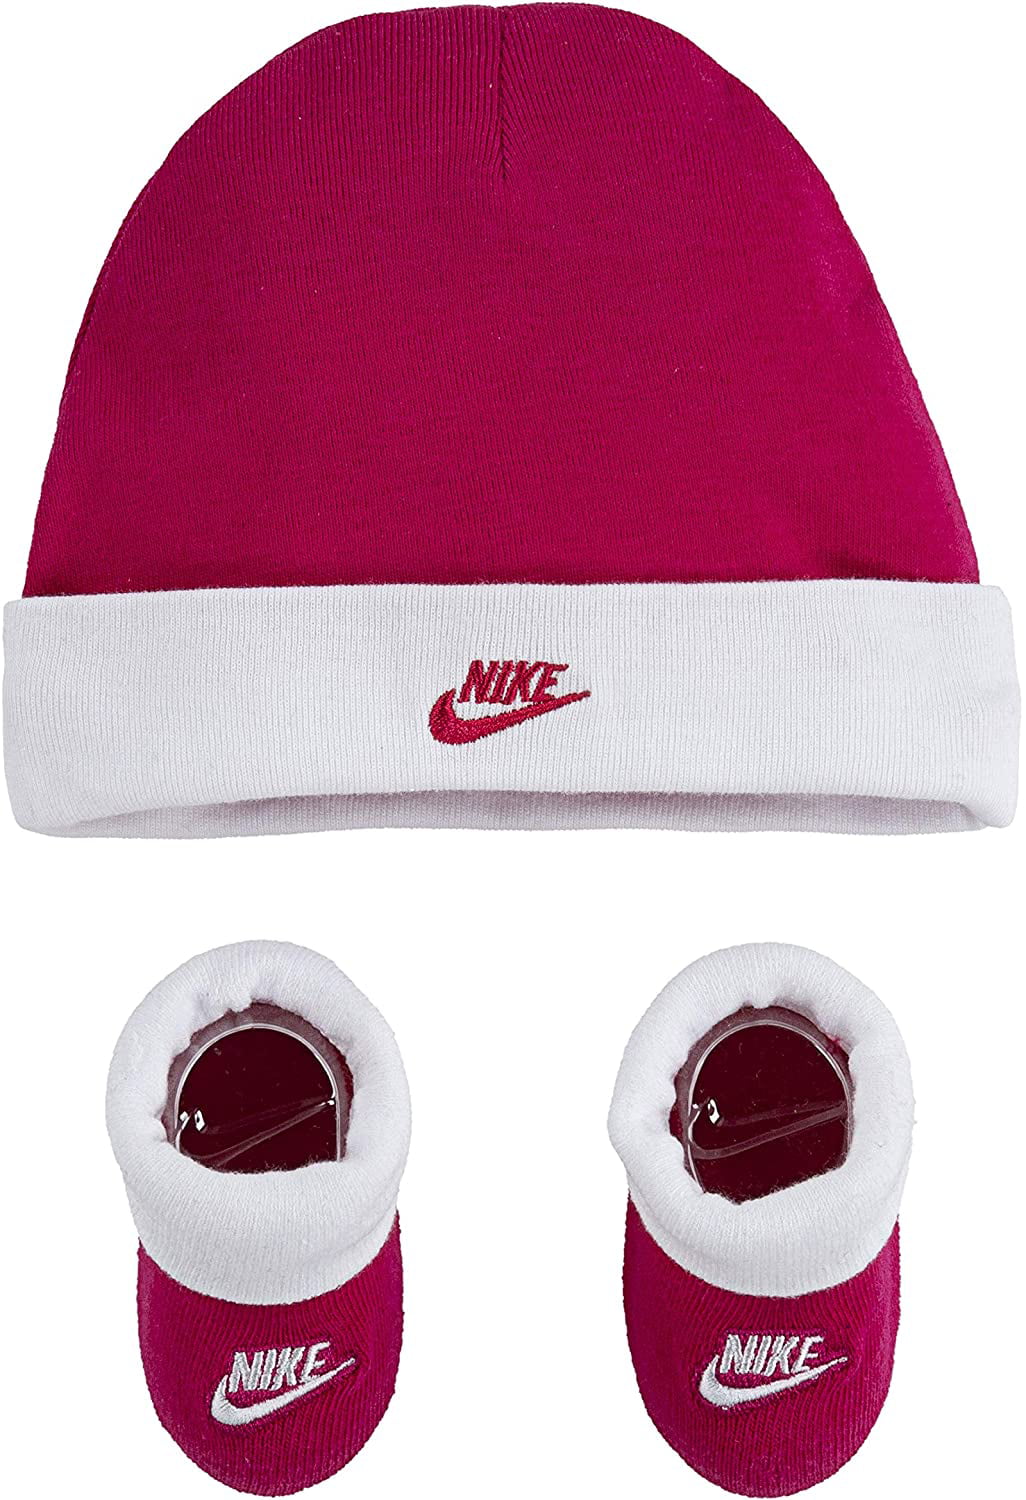 Coordinate Decent Calligrapher Nike 2-Piece Set Red/White Hat and Booties Baby Boys 0-6 Months -  Walmart.com